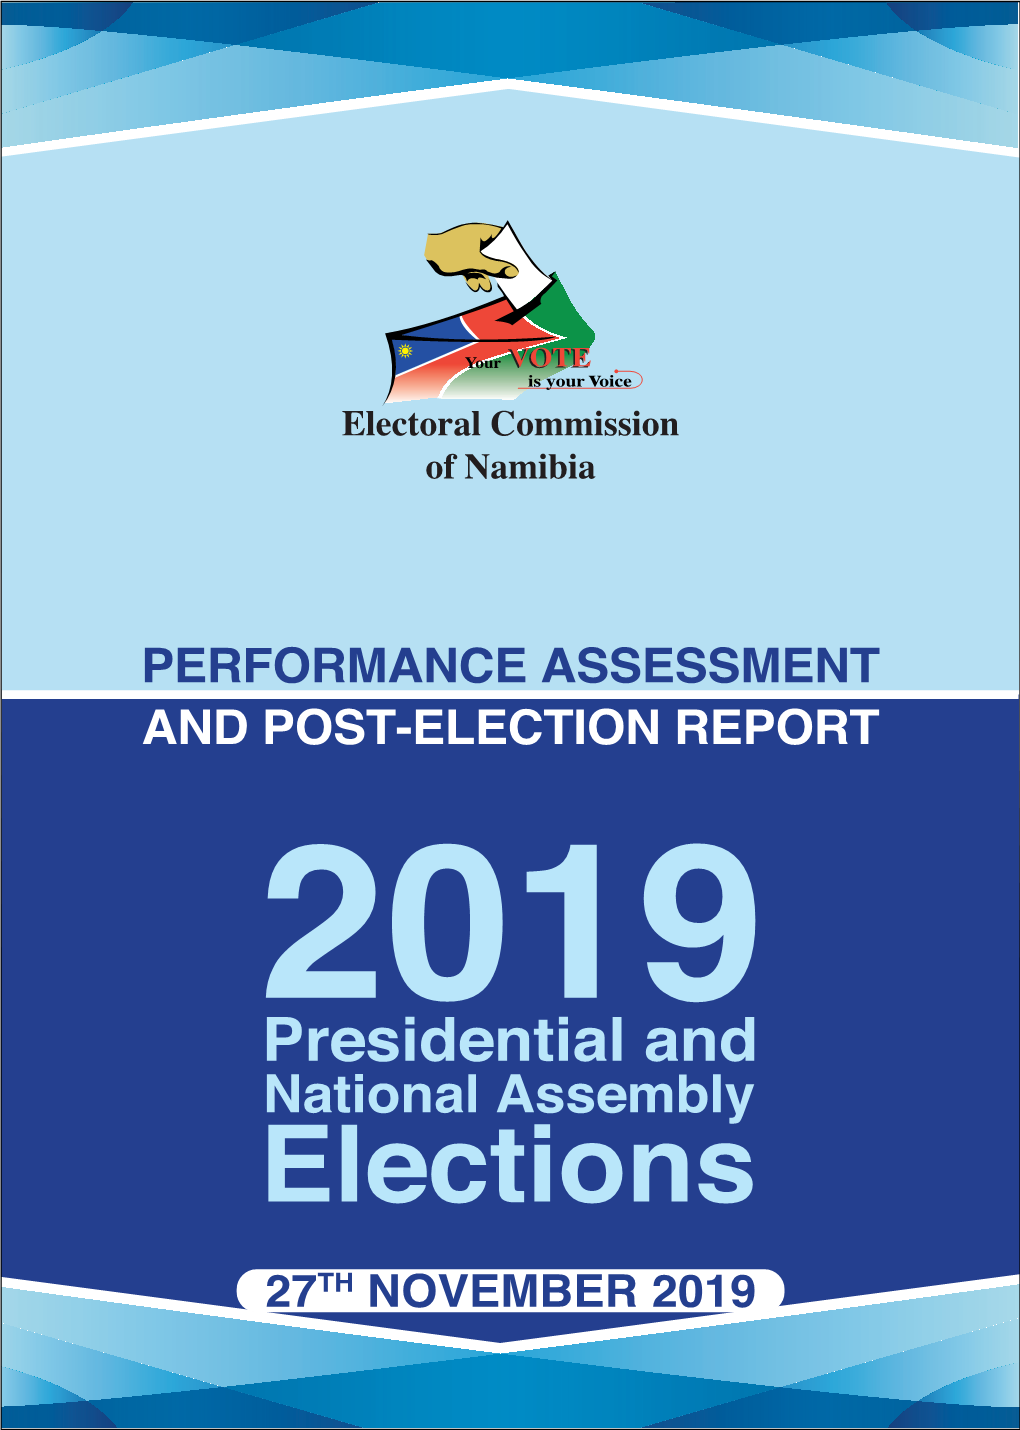 PERFORMANCE ASSESSMENT and POST-ELECTION REPORT 2019 Presidential and National Assembly Elections